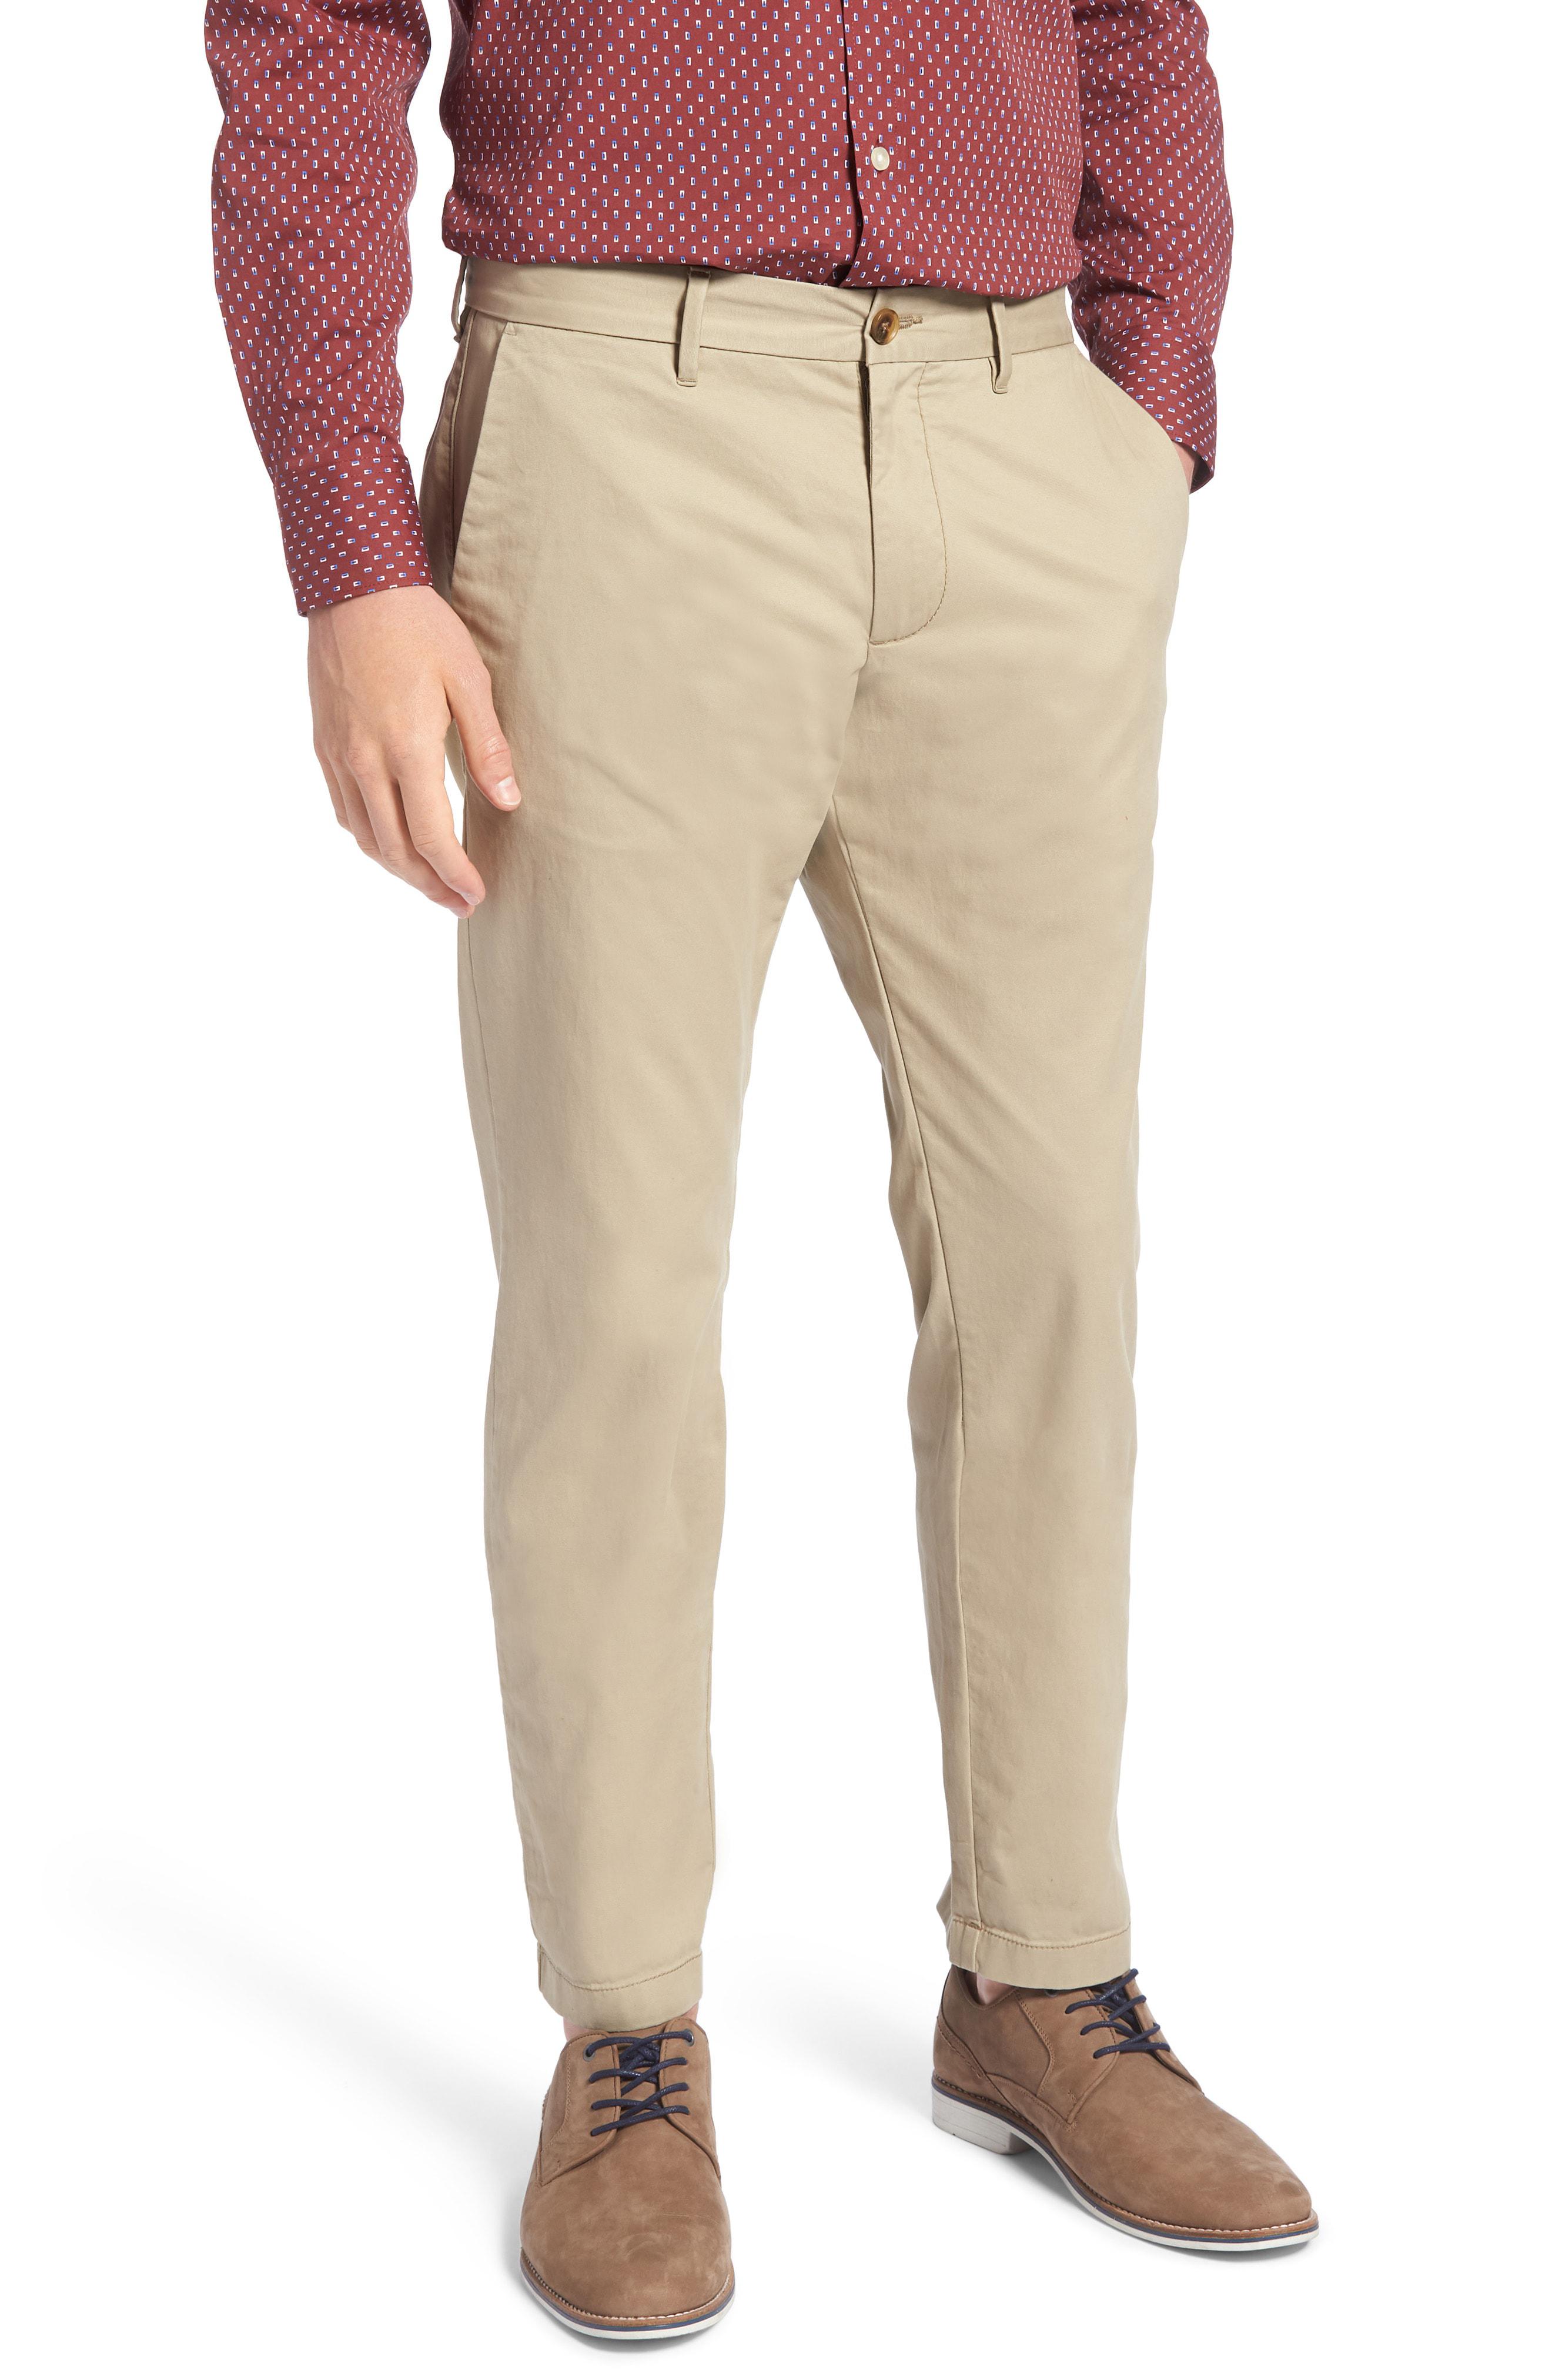 Lyst - Nordstrom 1901 Ballard Slim Fit Stretch Chino Pants in Natural ...